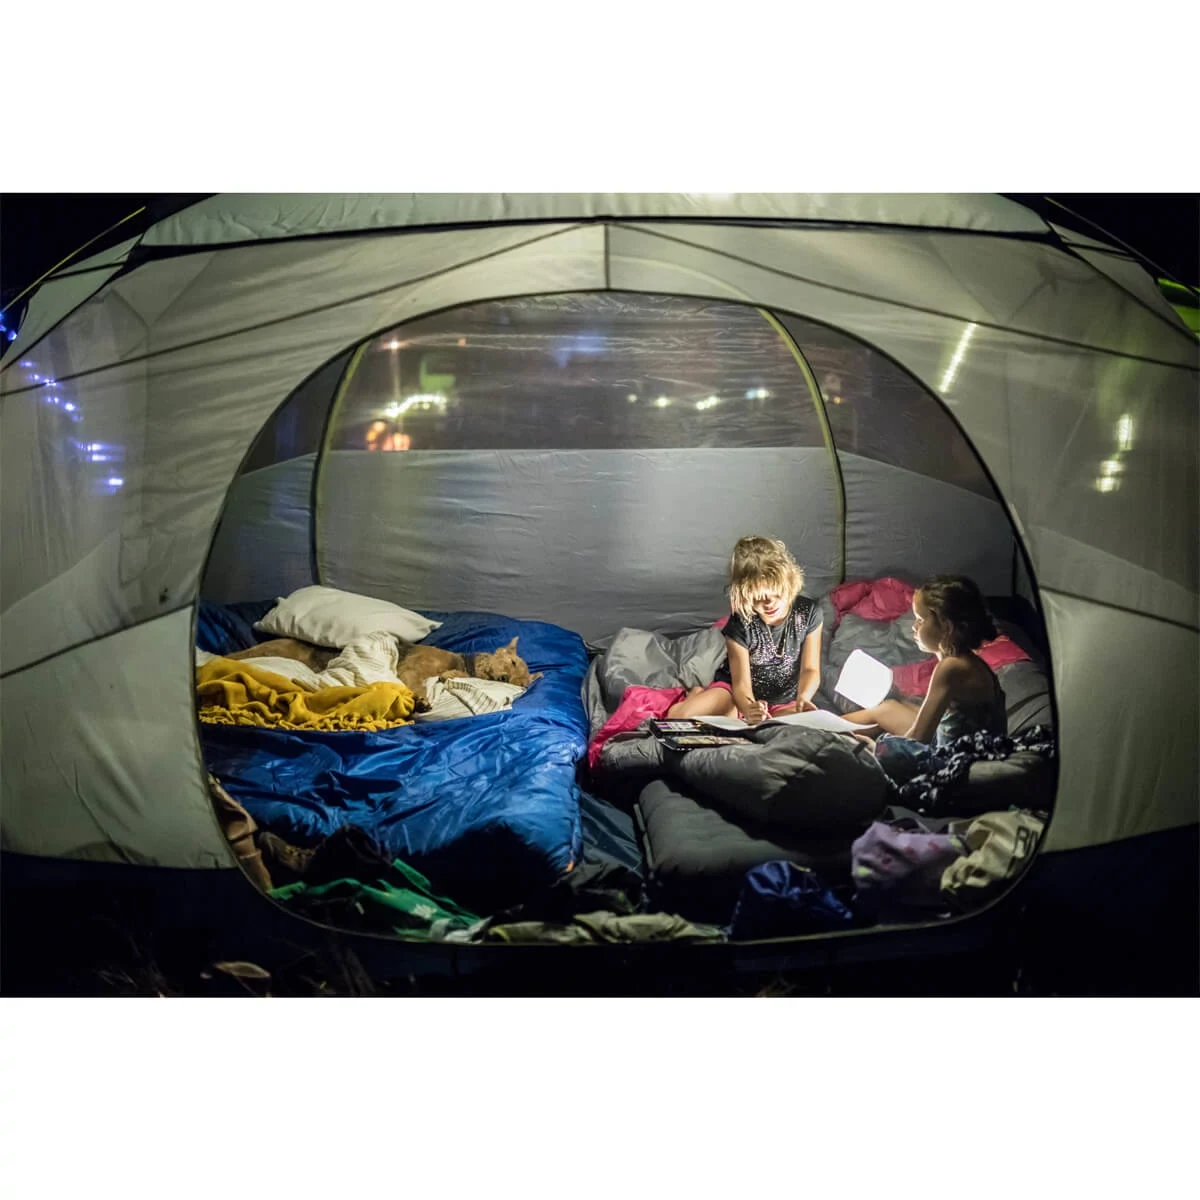 Kids inside a Space Camp 6 tent at night